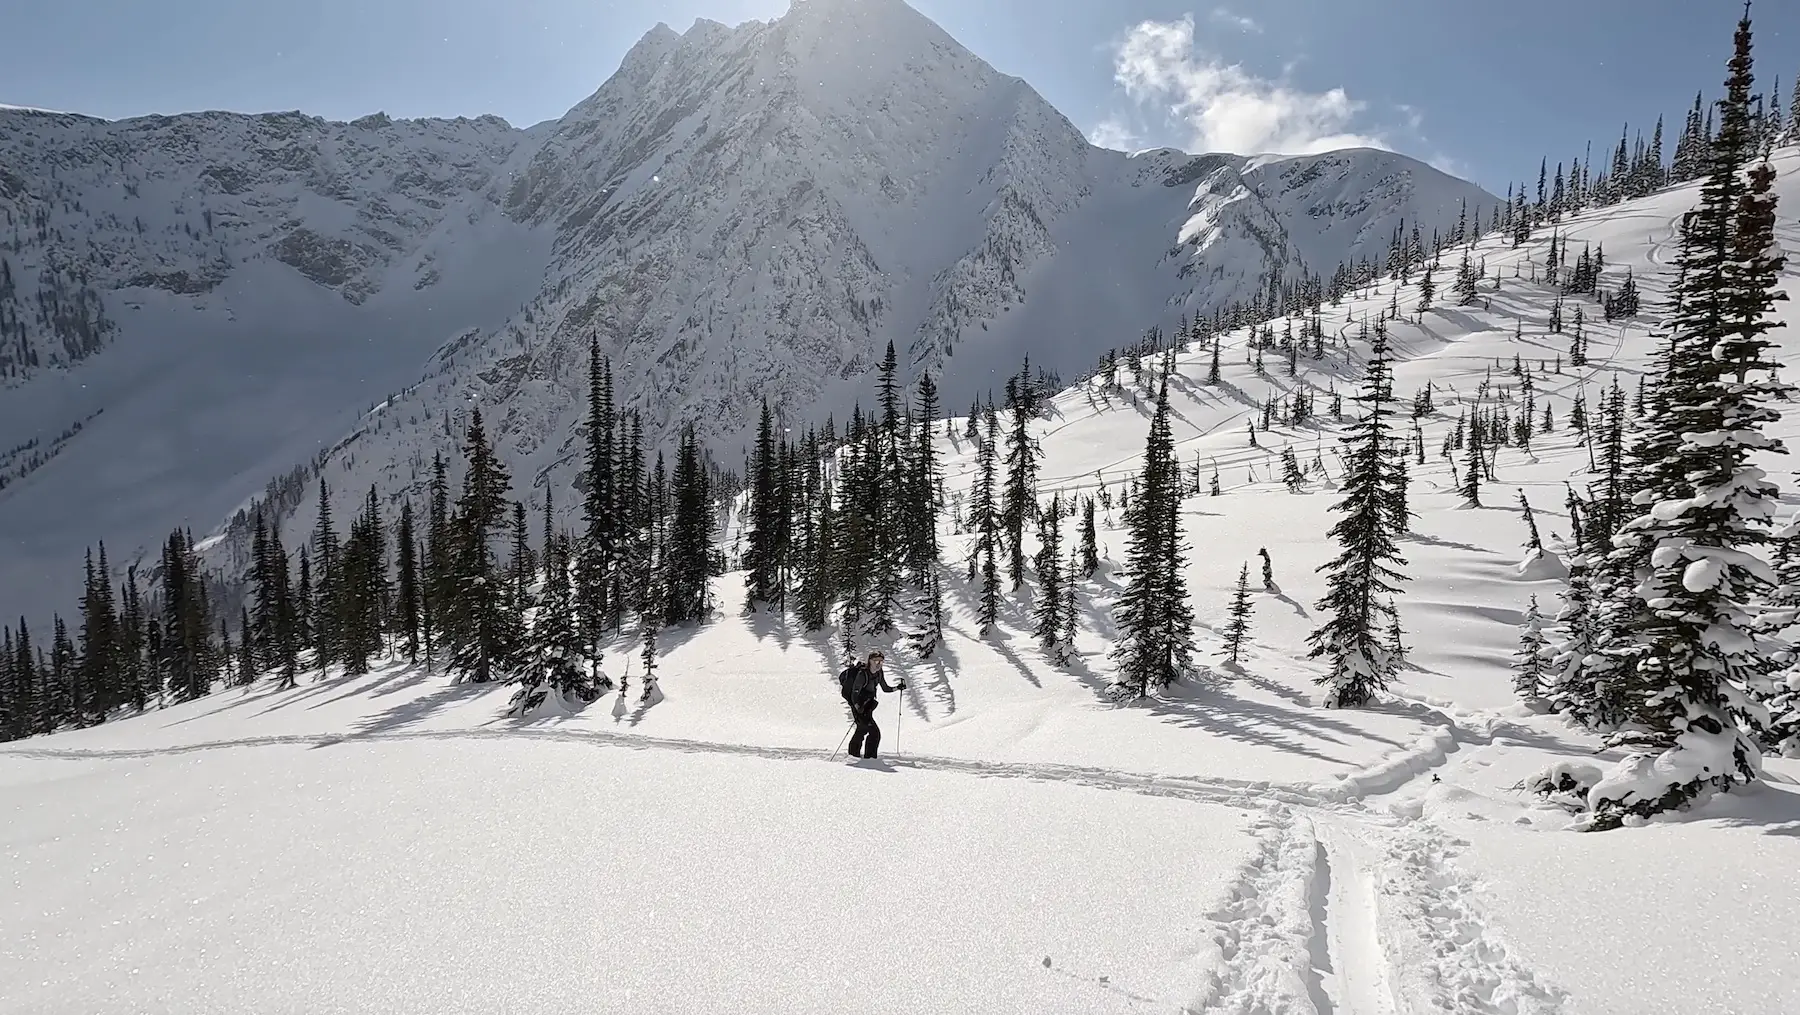 Hospital Gully on route to Video Peak Ski Touring Rogers Pass 